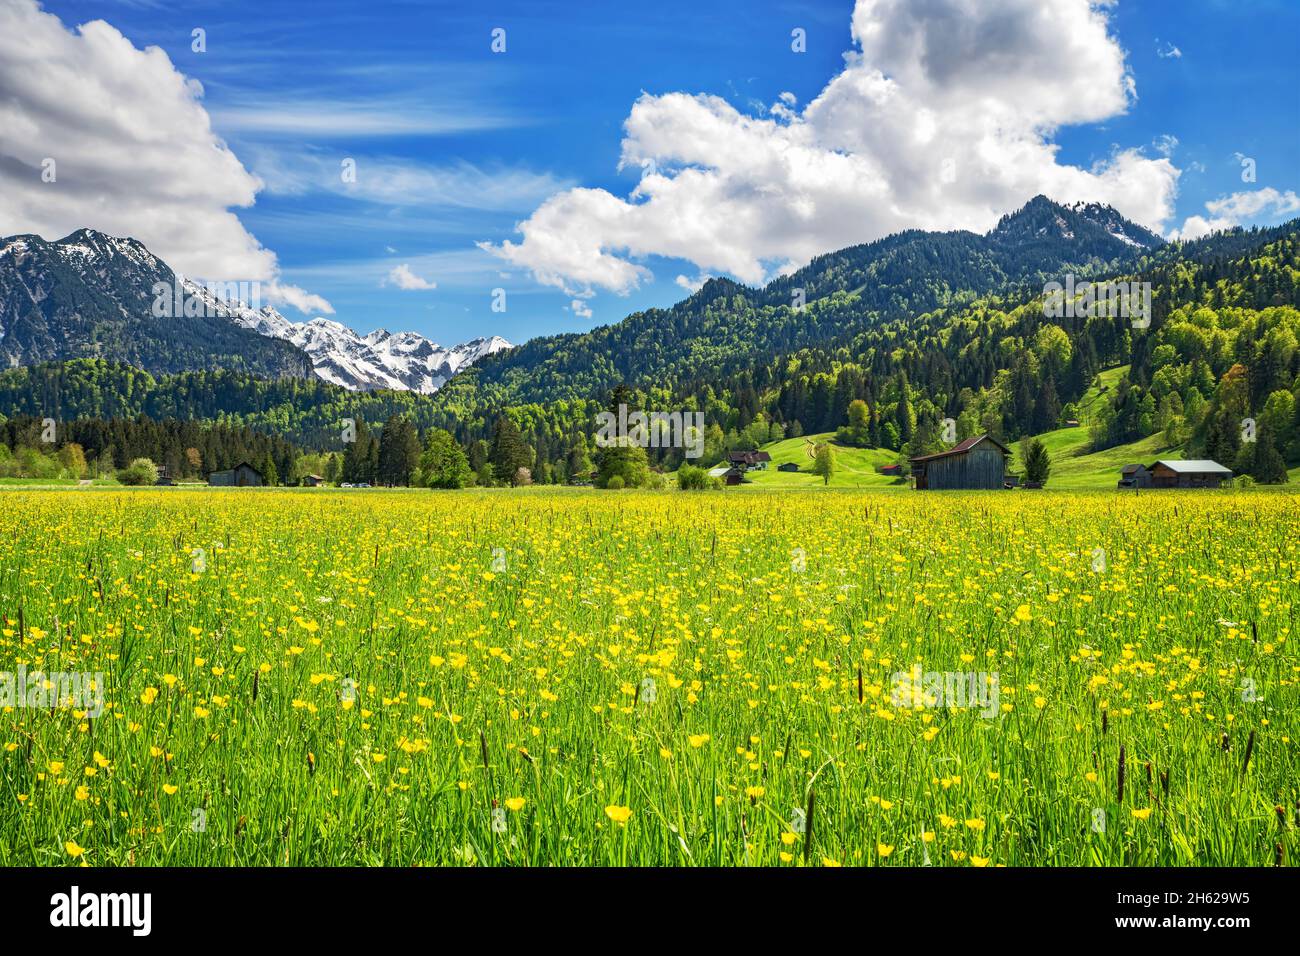 idyllic mountain landscape near oberstdorf on a sunny day in spring. blooming meadows,forests and snow-capped mountains under a blue sky. allgäu alps,bavaria,germany,europe Stock Photo